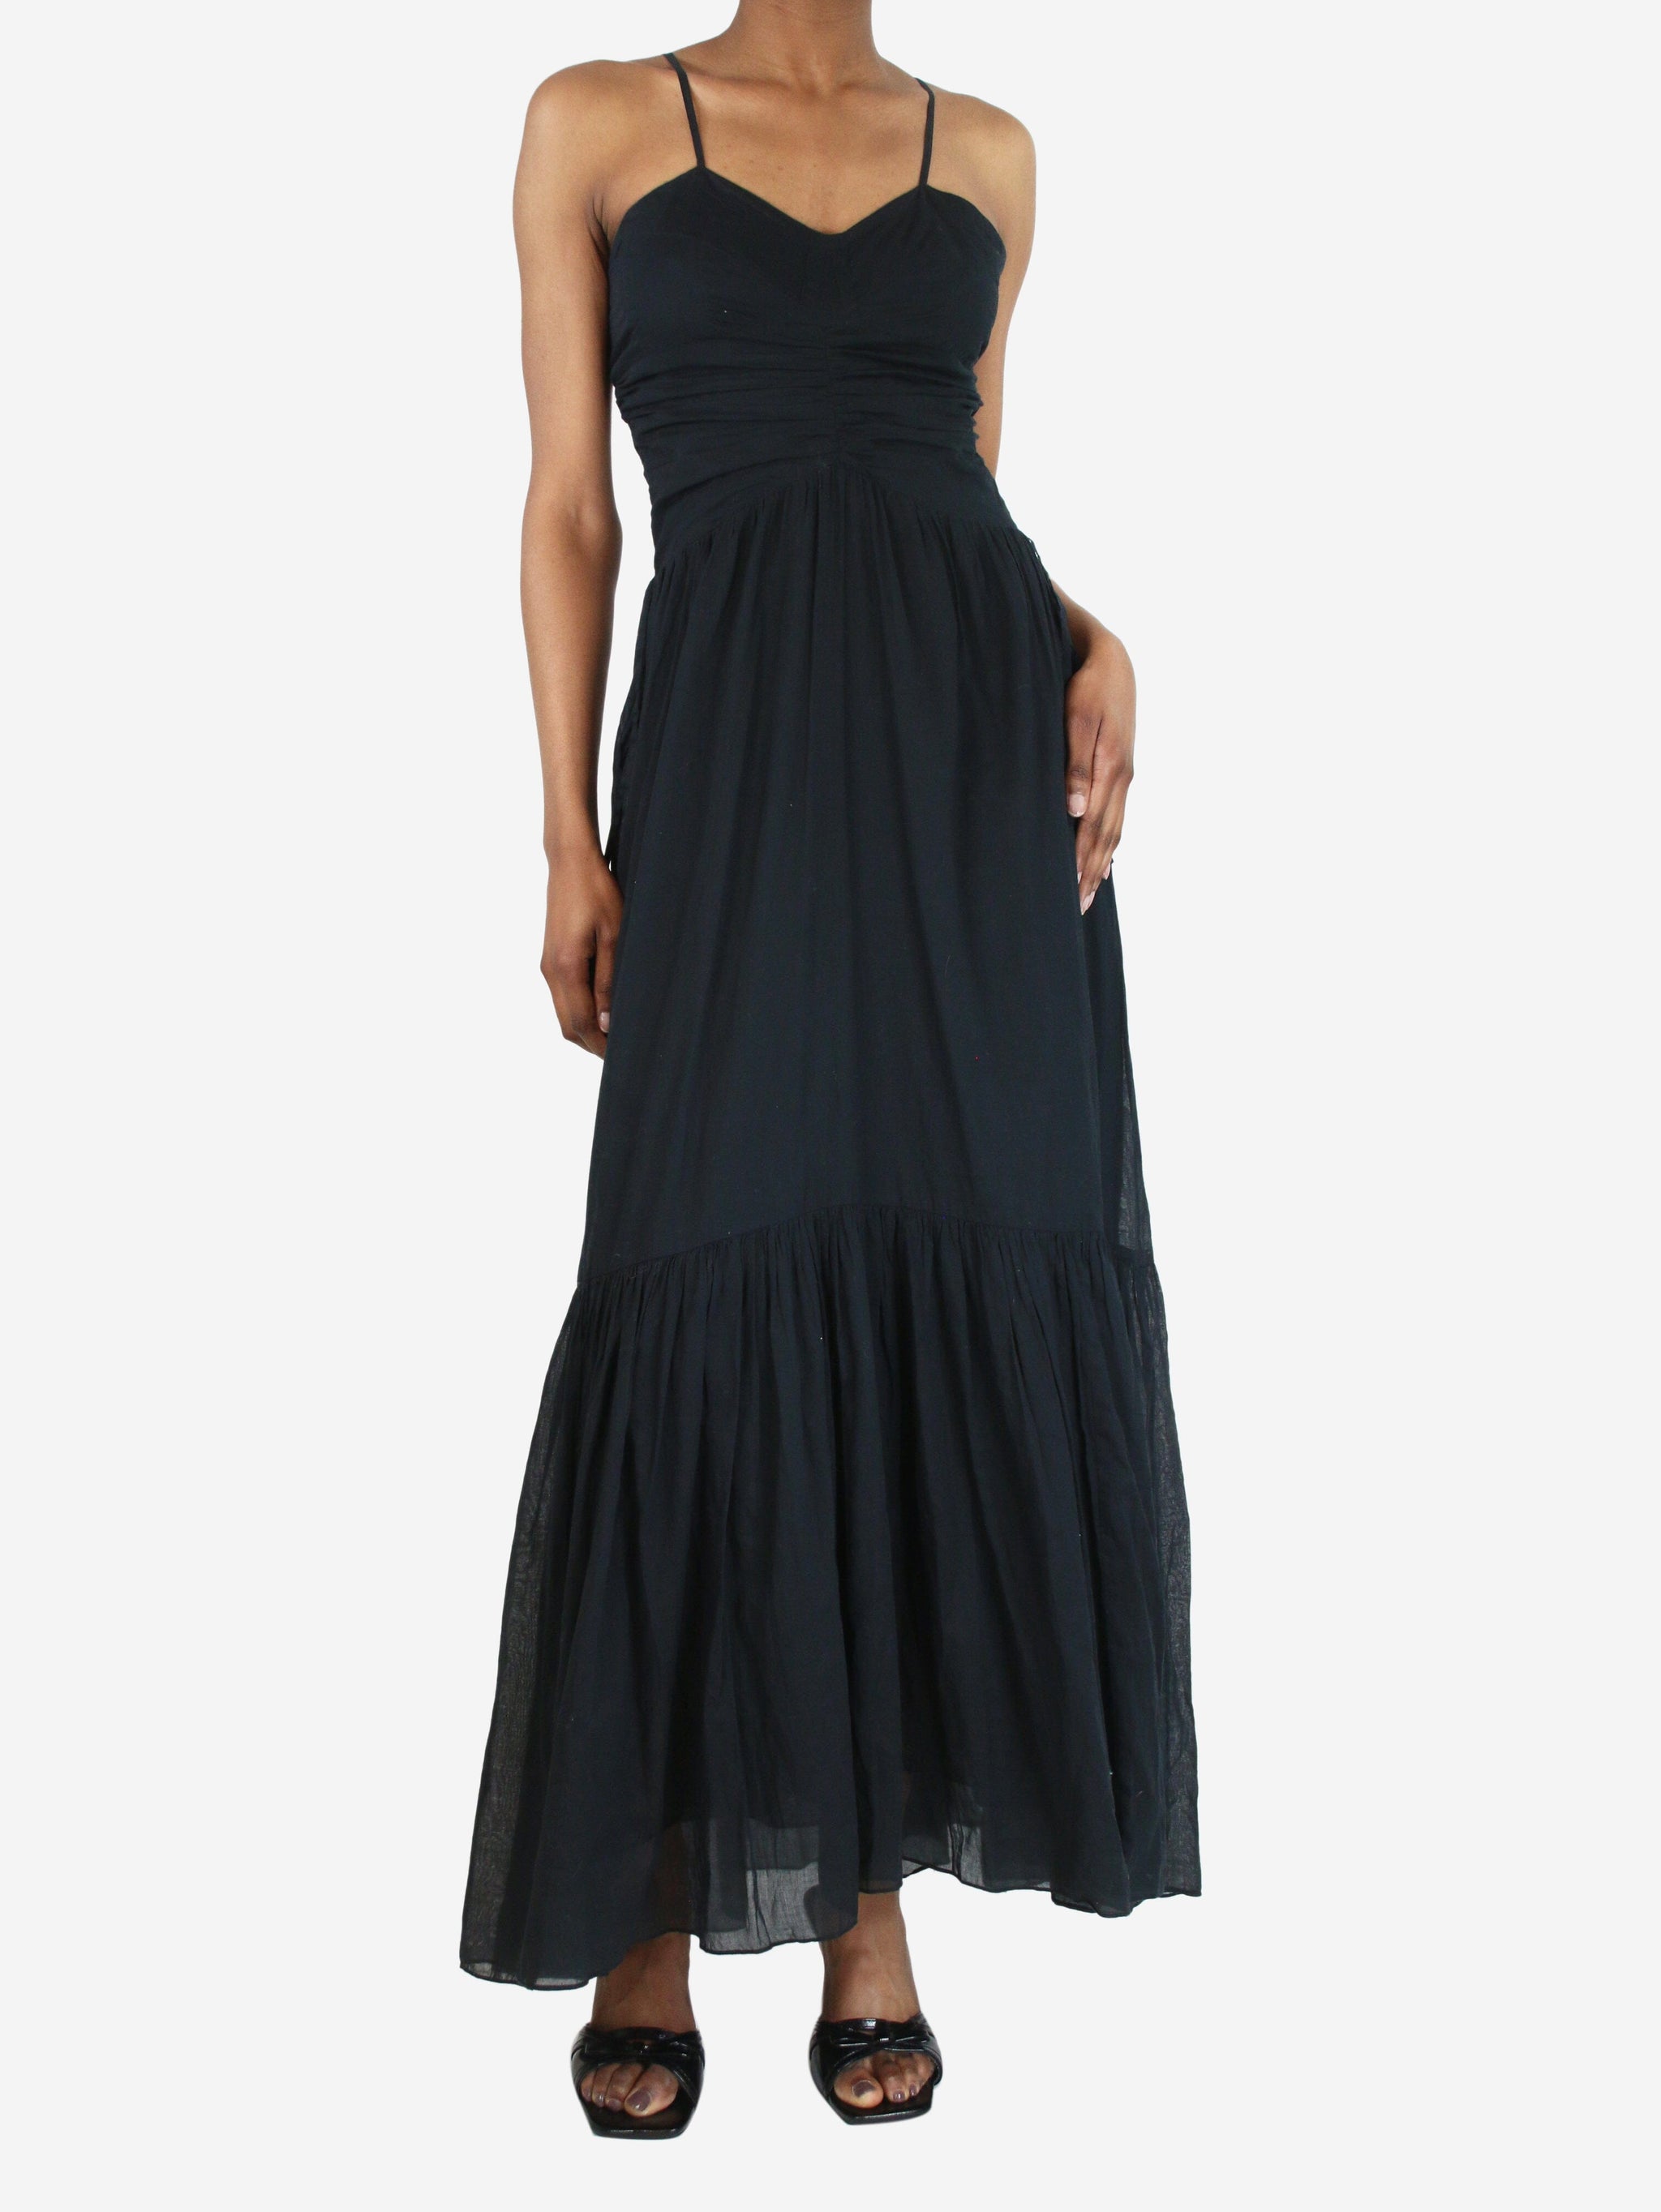 Isabel Marant Etoile pre-owned black tiered maxi dress | Sign of the Times